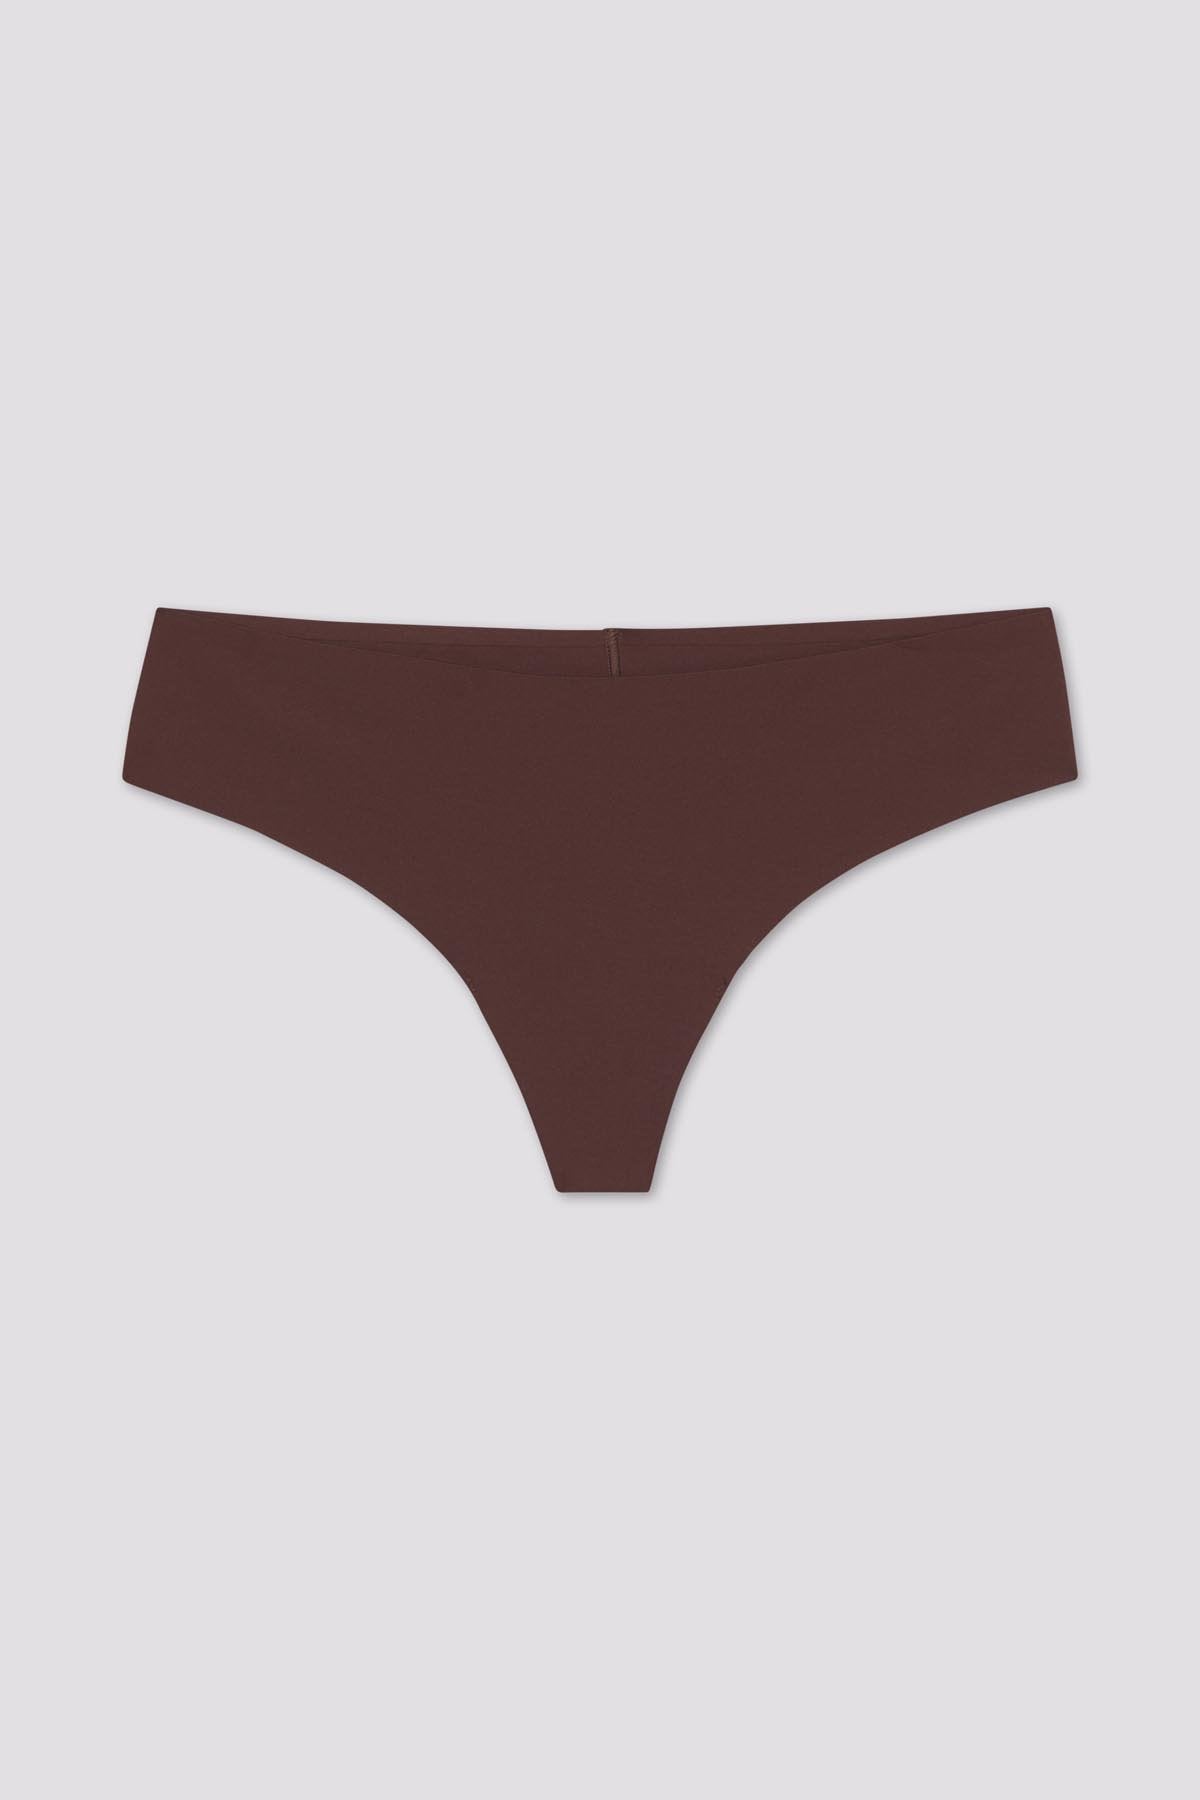 Sports Thong, Shop The Largest Collection